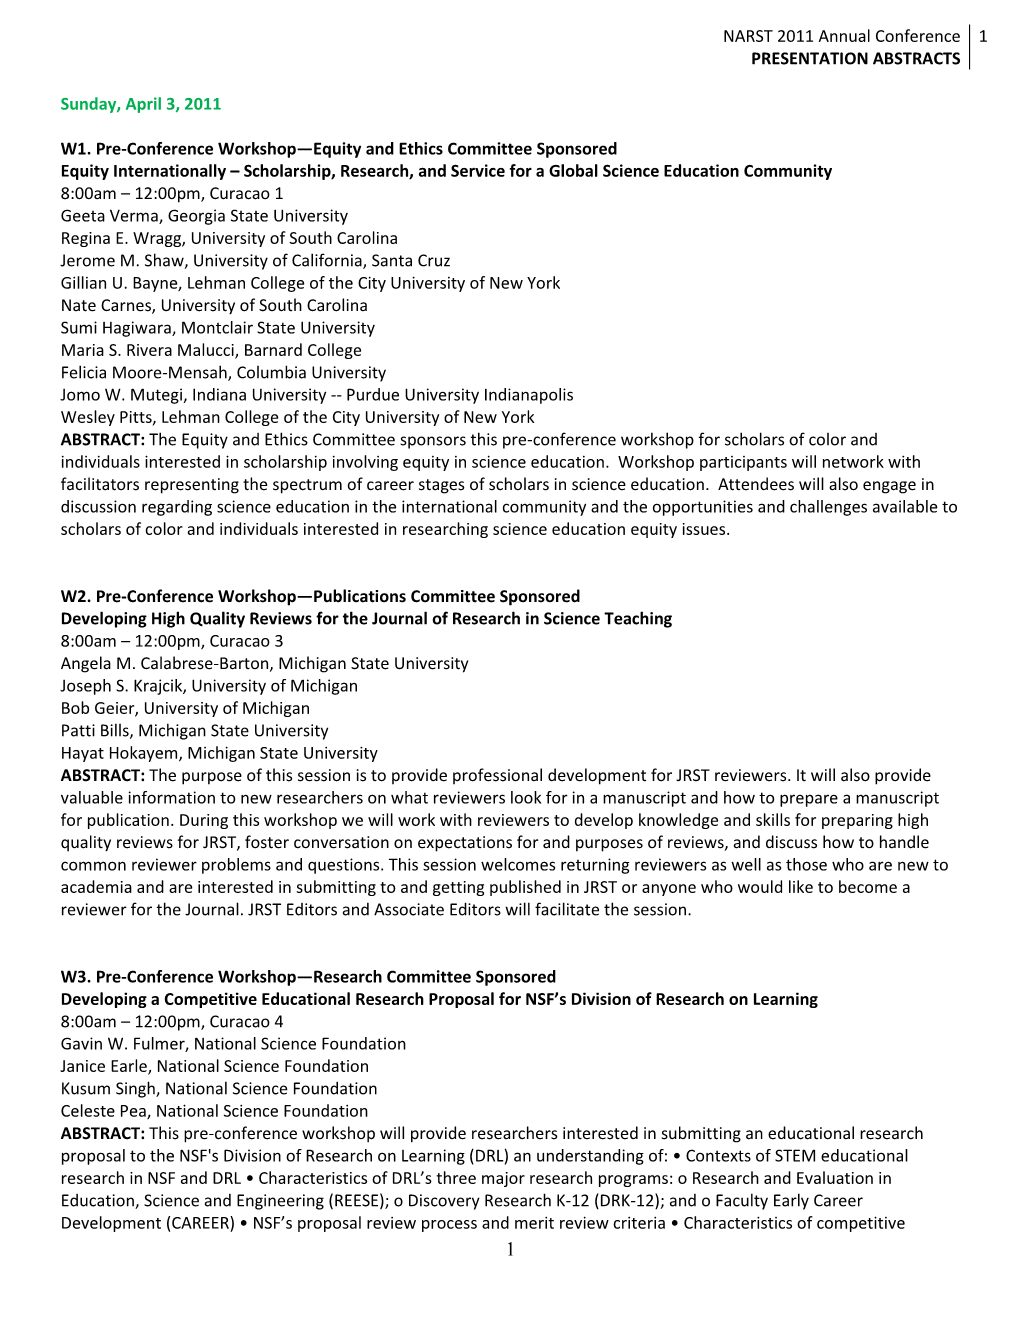 NARST 2011 Annual Conference PRESENTATION ABSTRACTS 1